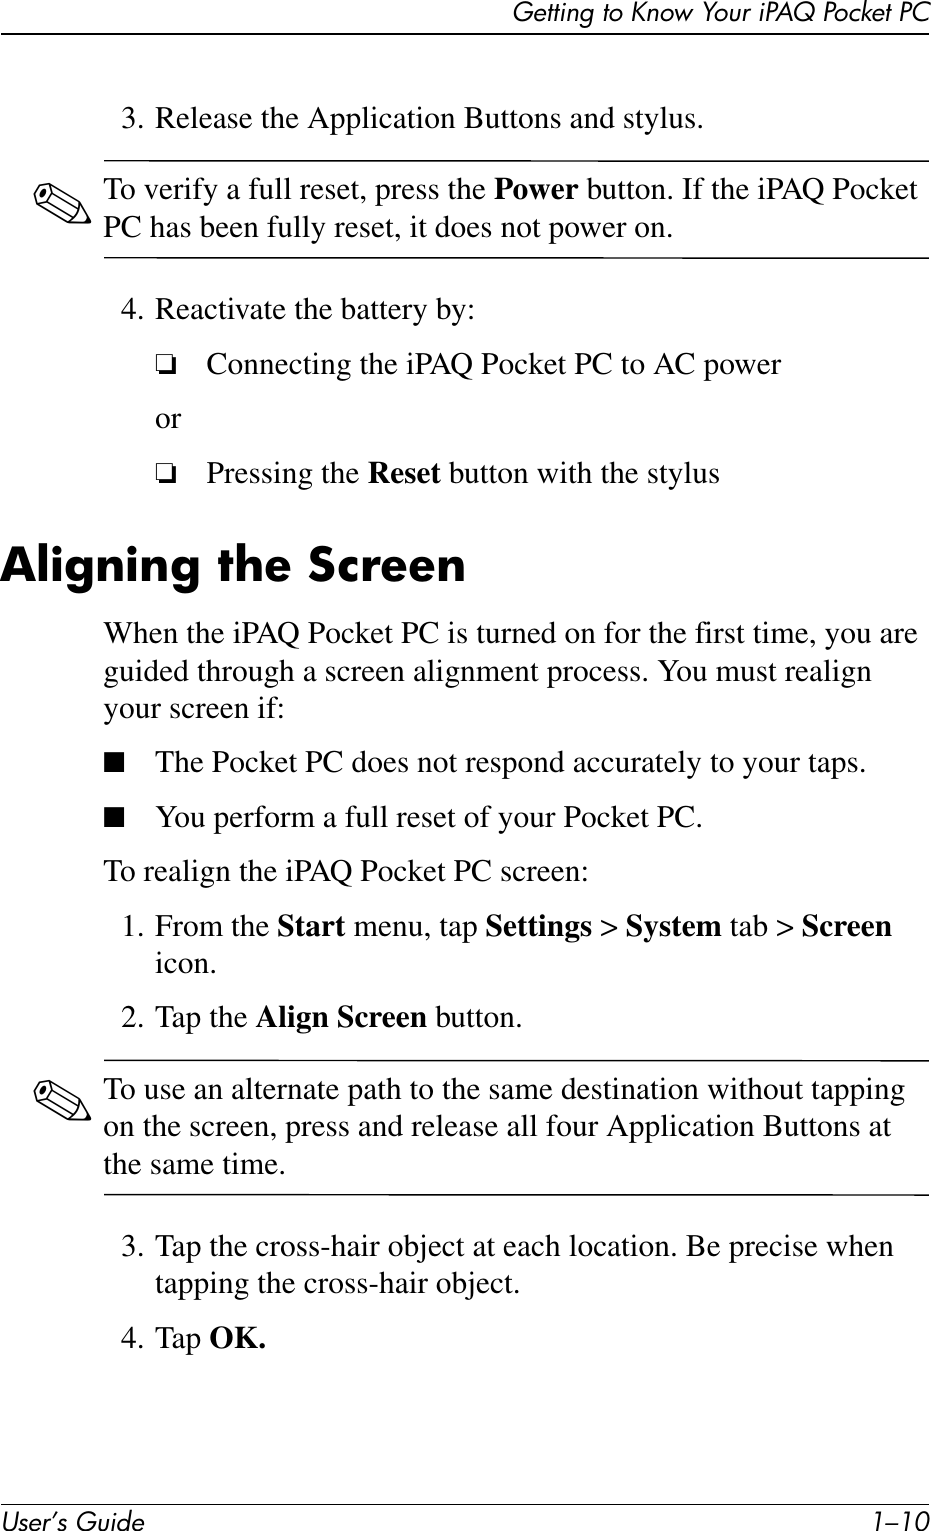 User’s Guide 1–10Getting to Know Your iPAQ Pocket PC3. Release the Application Buttons and stylus.✎To verify a full reset, press the Power button. If the iPAQ Pocket PC has been fully reset, it does not power on.4. Reactivate the battery by:❏Connecting the iPAQ Pocket PC to AC poweror❏Pressing the Reset button with the stylusAligning the ScreenWhen the iPAQ Pocket PC is turned on for the first time, you are guided through a screen alignment process. You must realign your screen if:■The Pocket PC does not respond accurately to your taps.■You perform a full reset of your Pocket PC.To realign the iPAQ Pocket PC screen:1. From the Start menu, tap Settings &gt; System tab &gt; Screen icon.2. Tap the Align Screen button.✎To use an alternate path to the same destination without tapping on the screen, press and release all four Application Buttons at the same time.3. Tap the cross-hair object at each location. Be precise when tapping the cross-hair object.4. Tap OK.